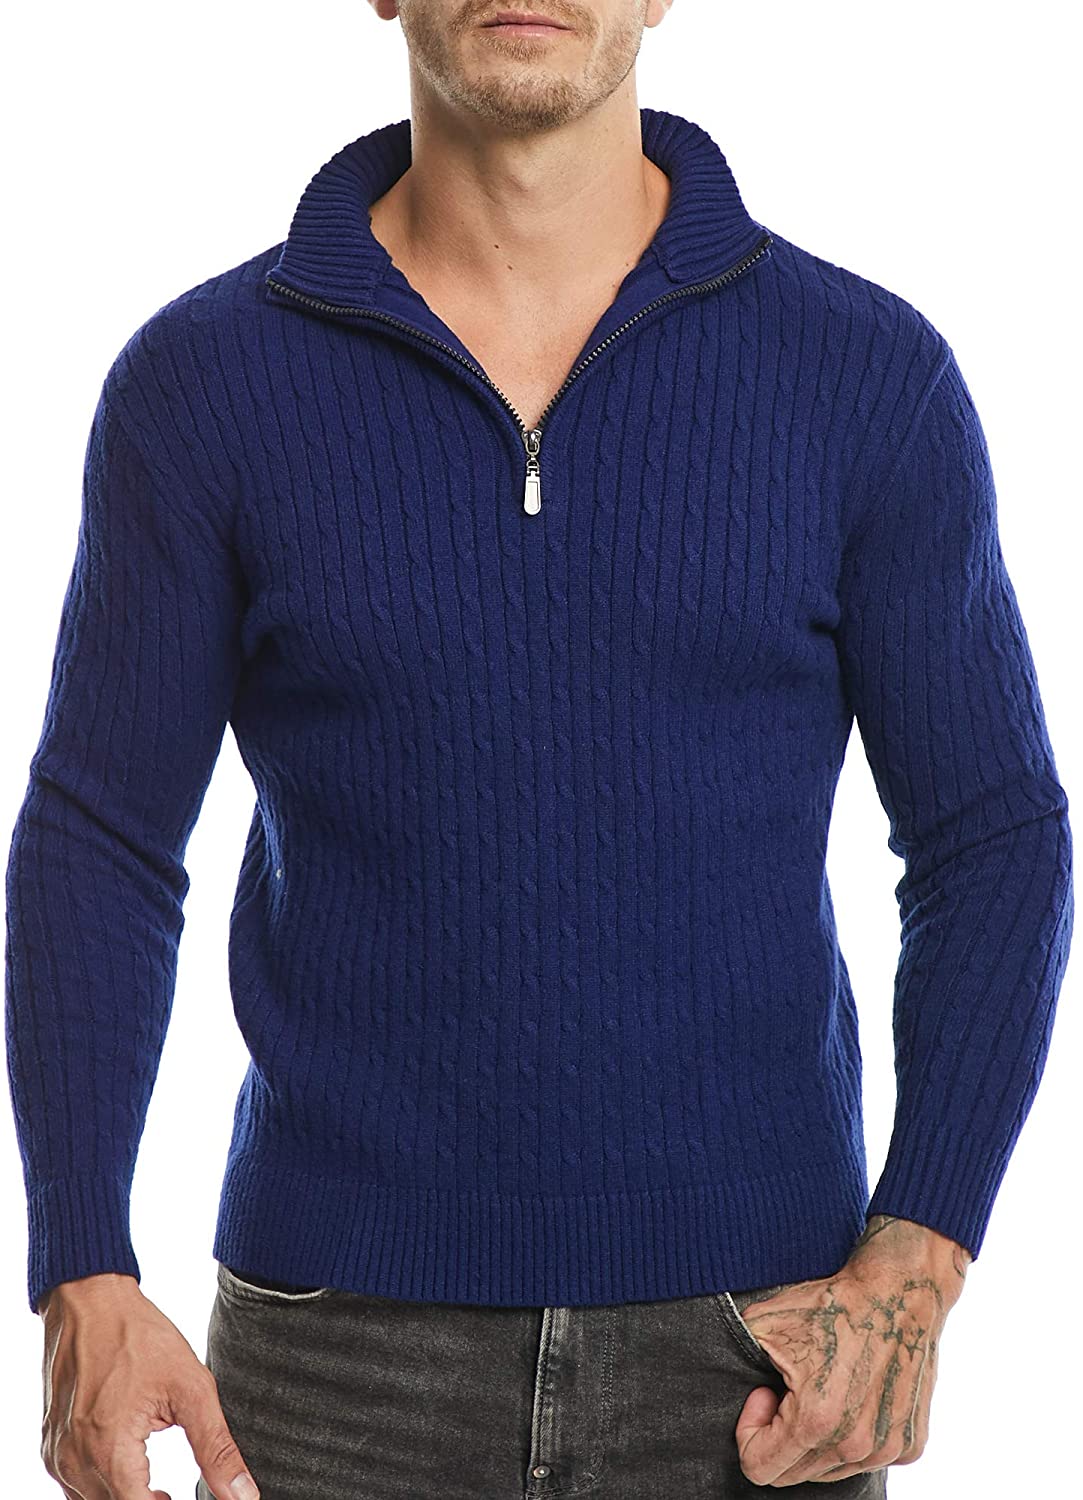 SATINIOR Men‘s Casual Soft Knit Long Sleeve Zip Up Mock Neck Polo ...